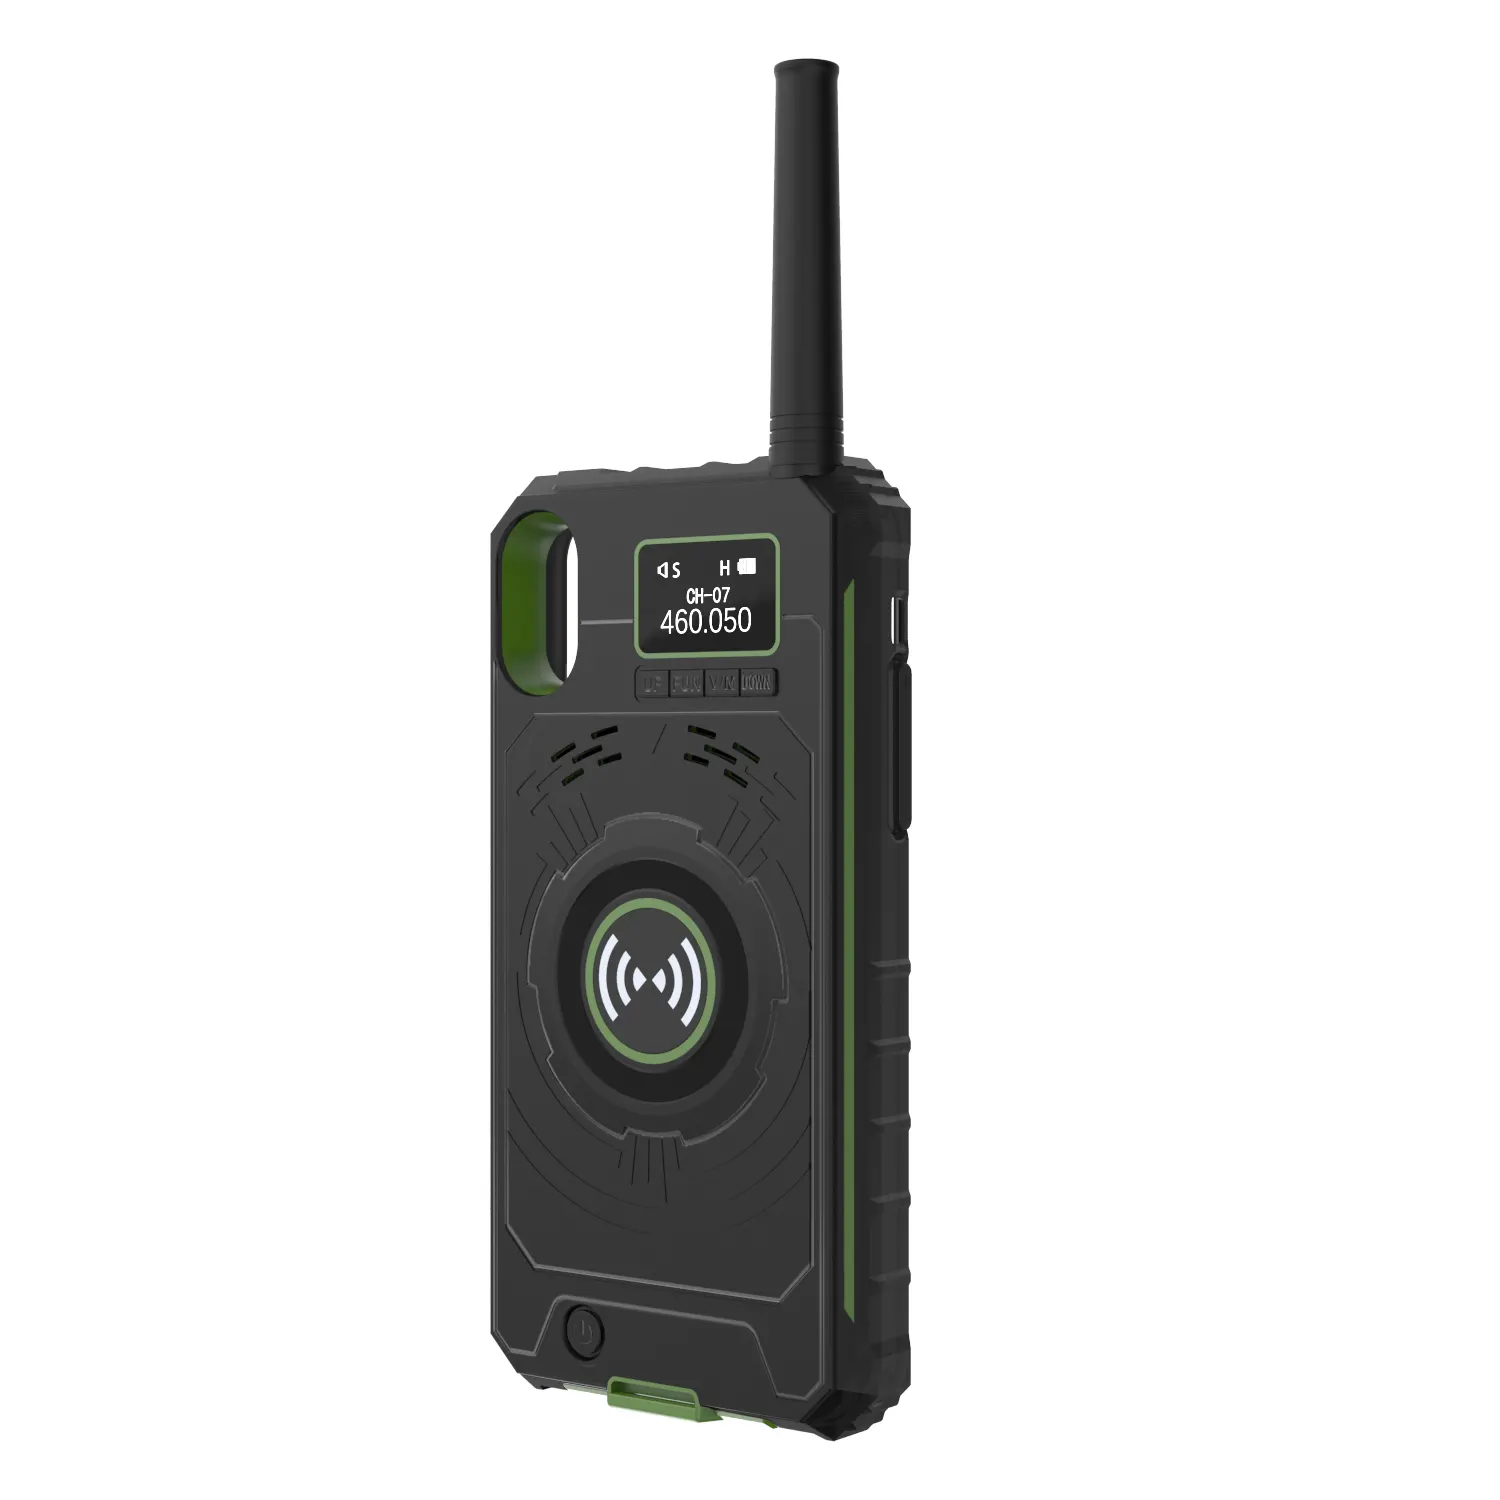 Long range portable cheap ham radio for Iphone case handy amateur walkie talkie for sale out high quality two way radio JM-01